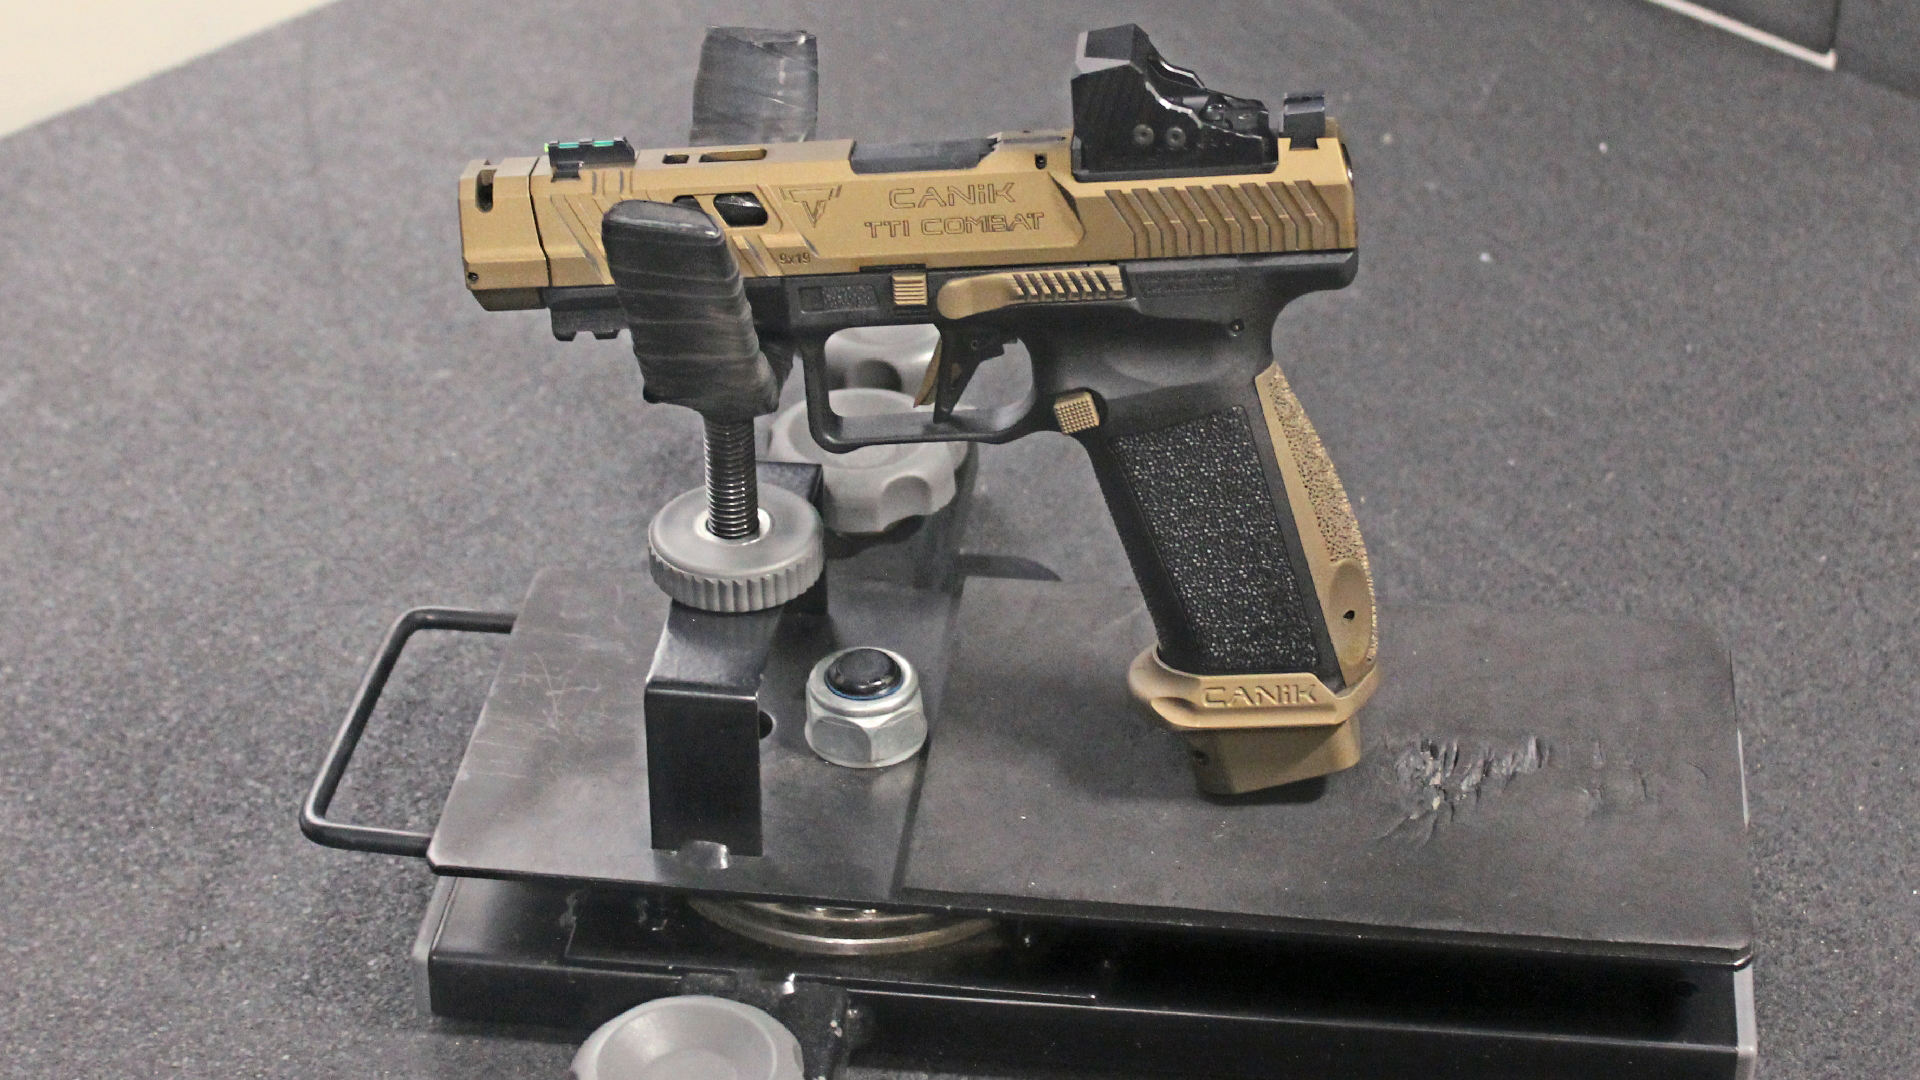 Canik TTI Combat 9 mm in rest at shooting range on table